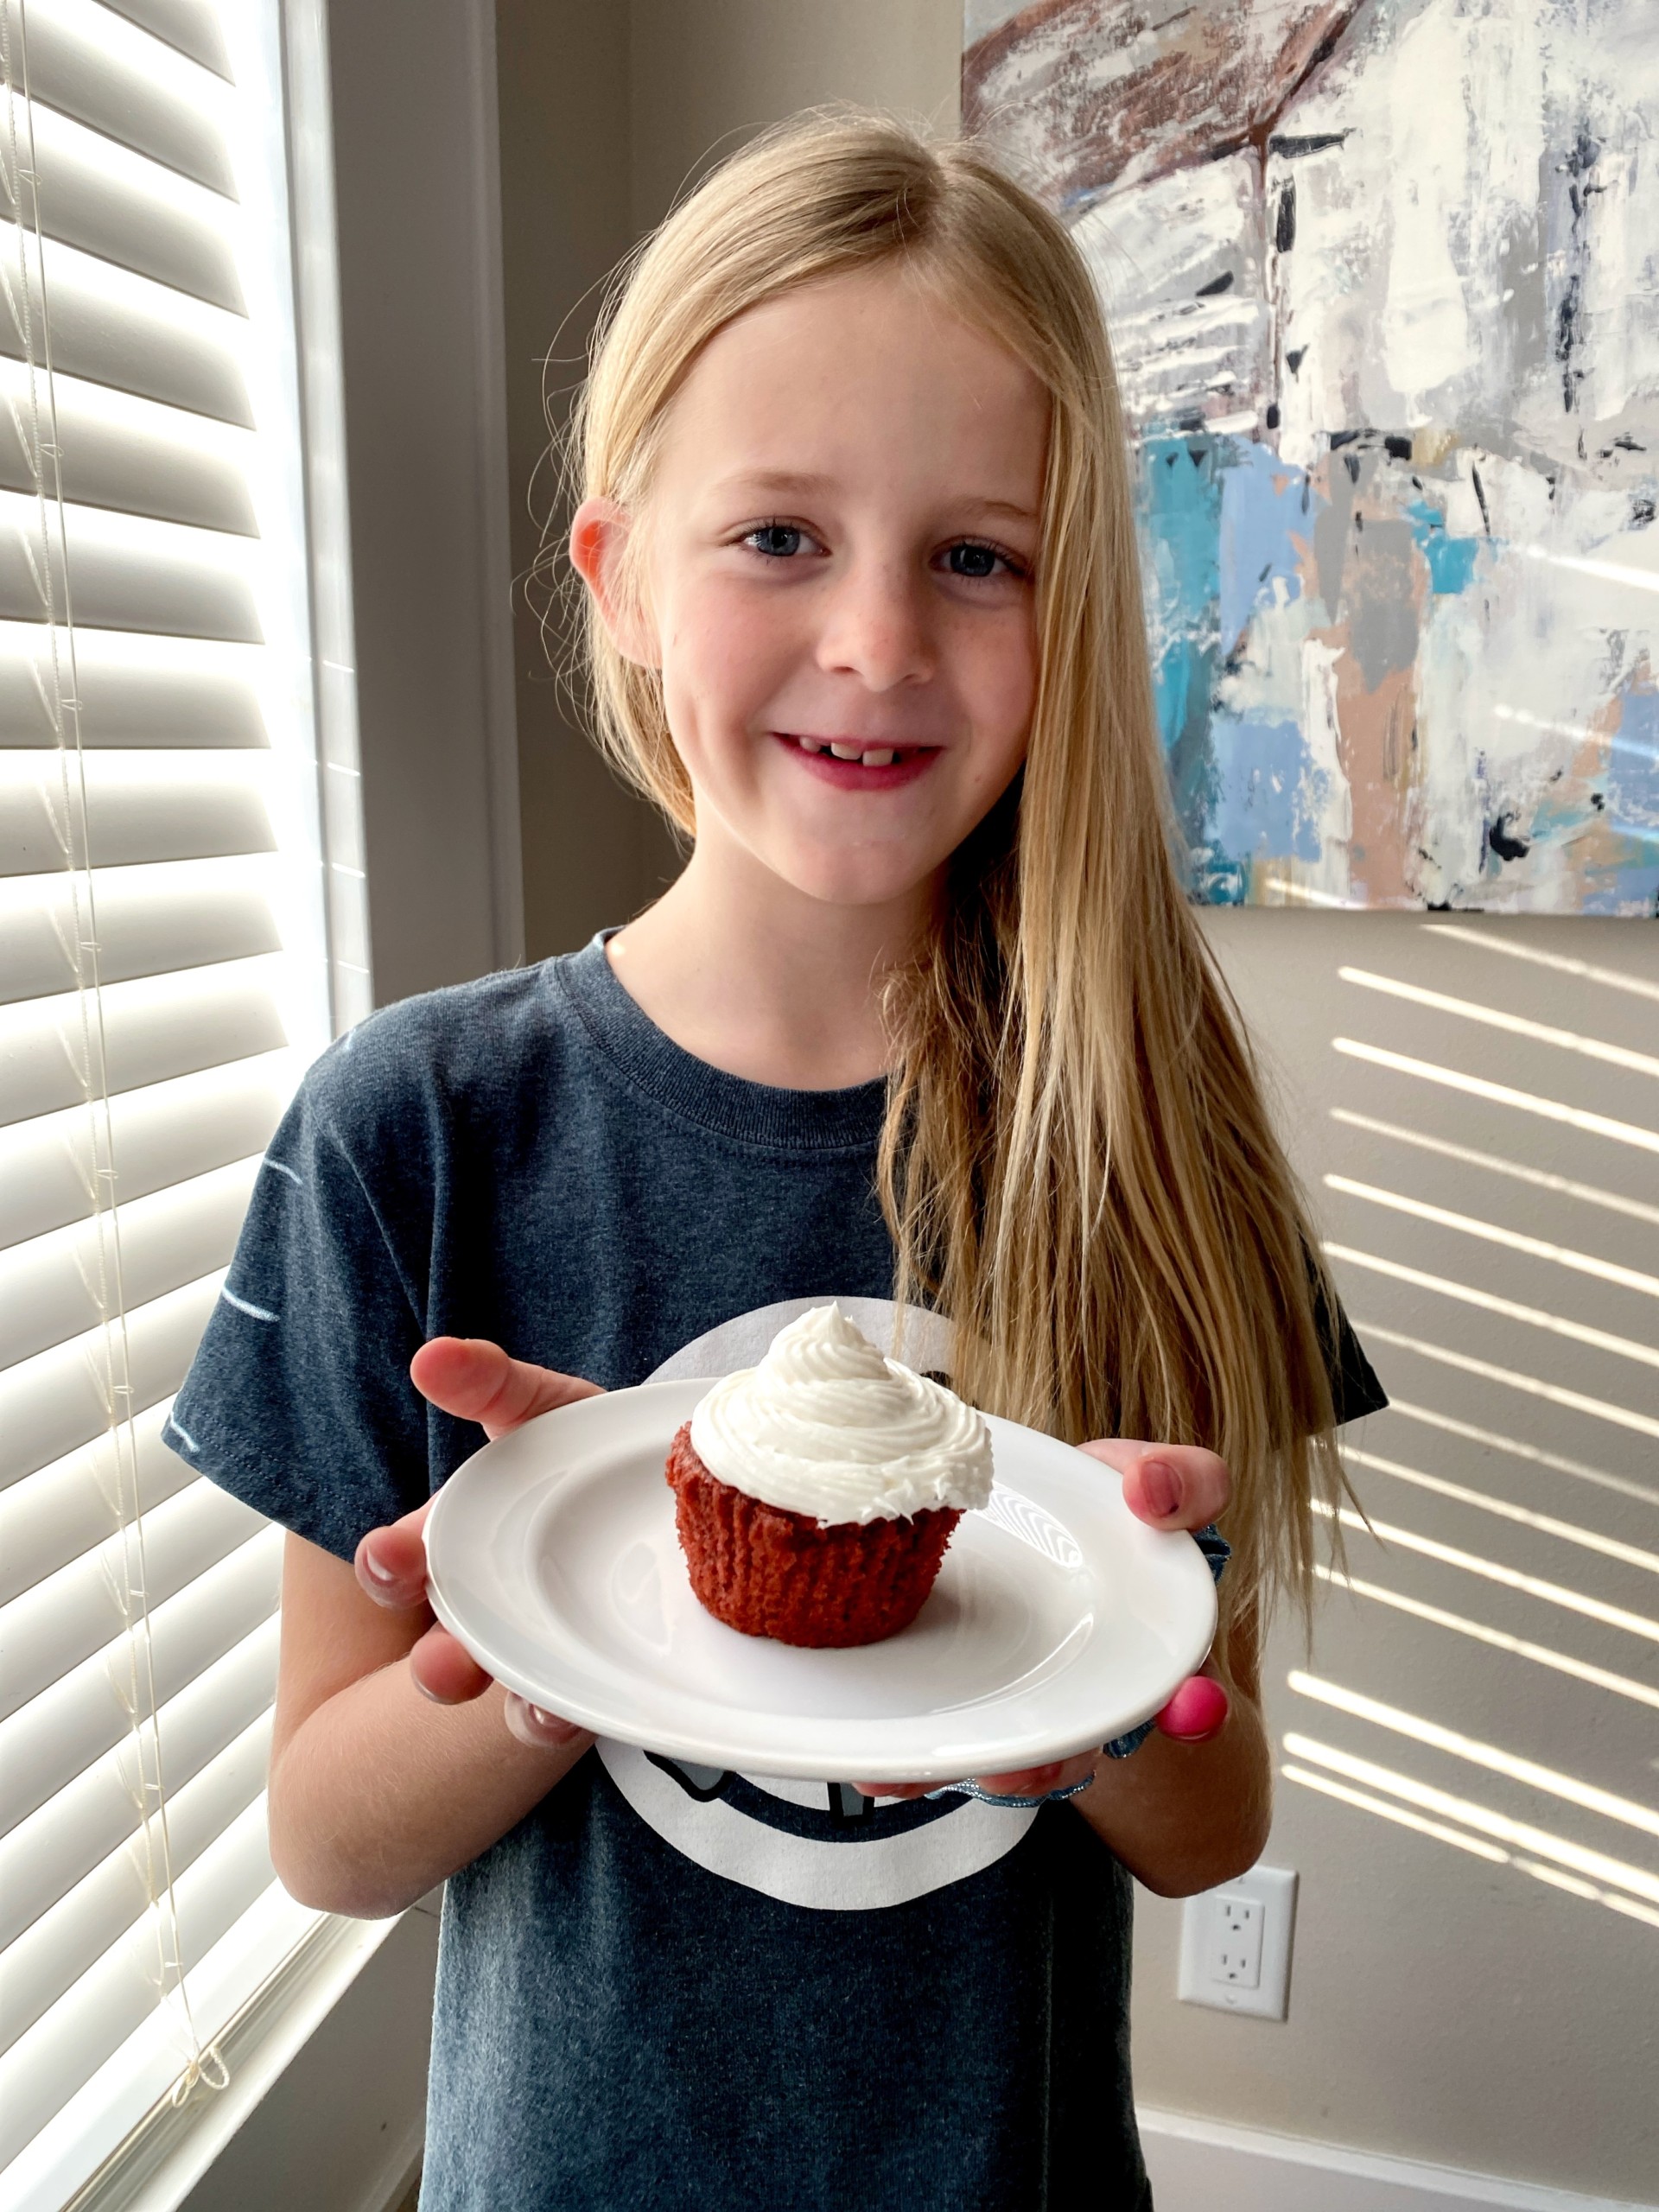 Red Velvet Cupcakes | The Gingham Apron